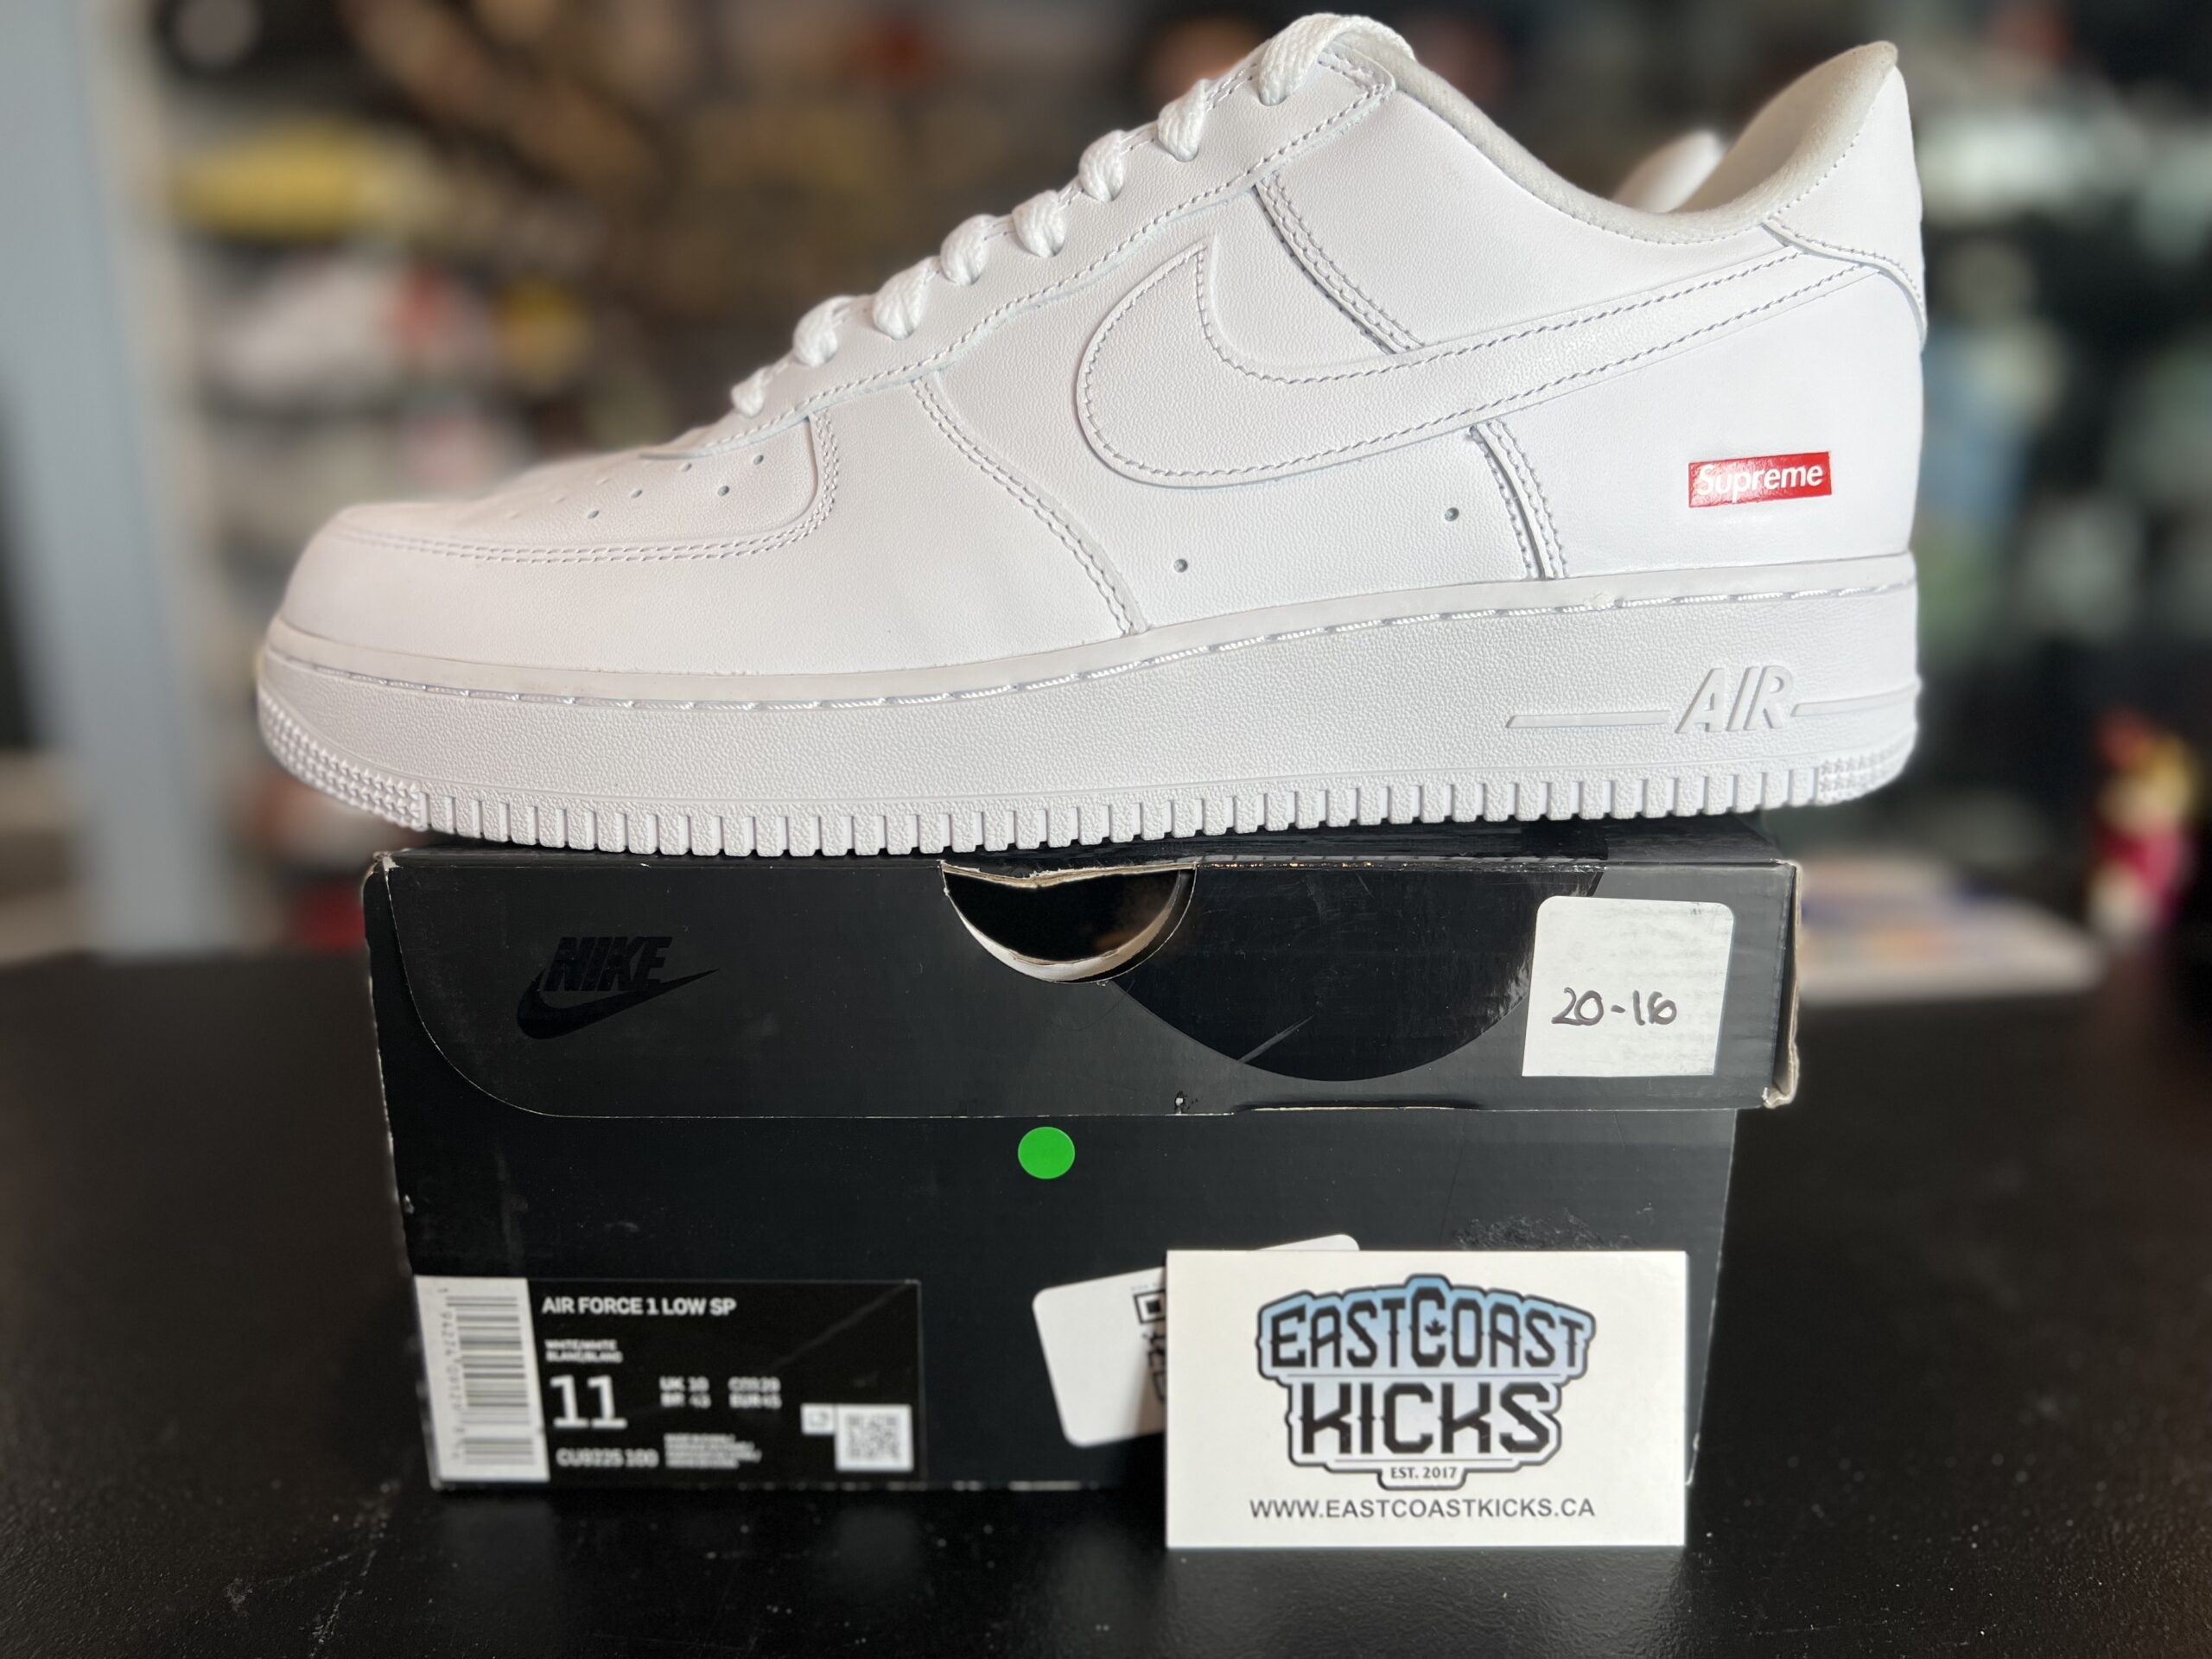 Preowned Nike Air Force 1 Low Supreme White Size 11